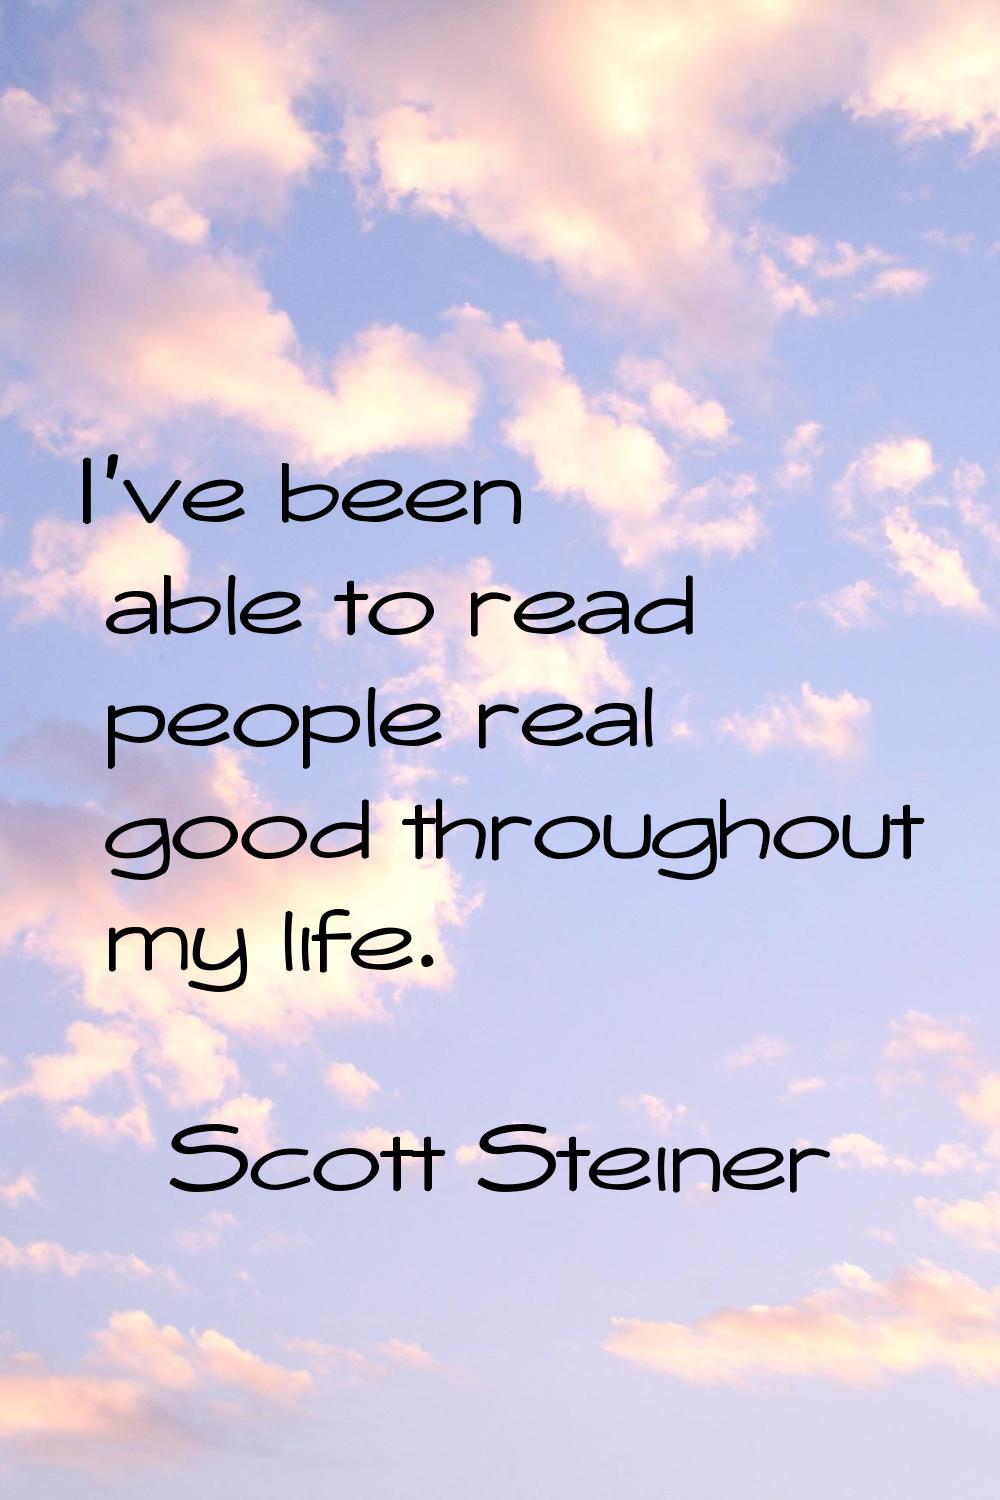 I've been able to read people real good throughout my life.